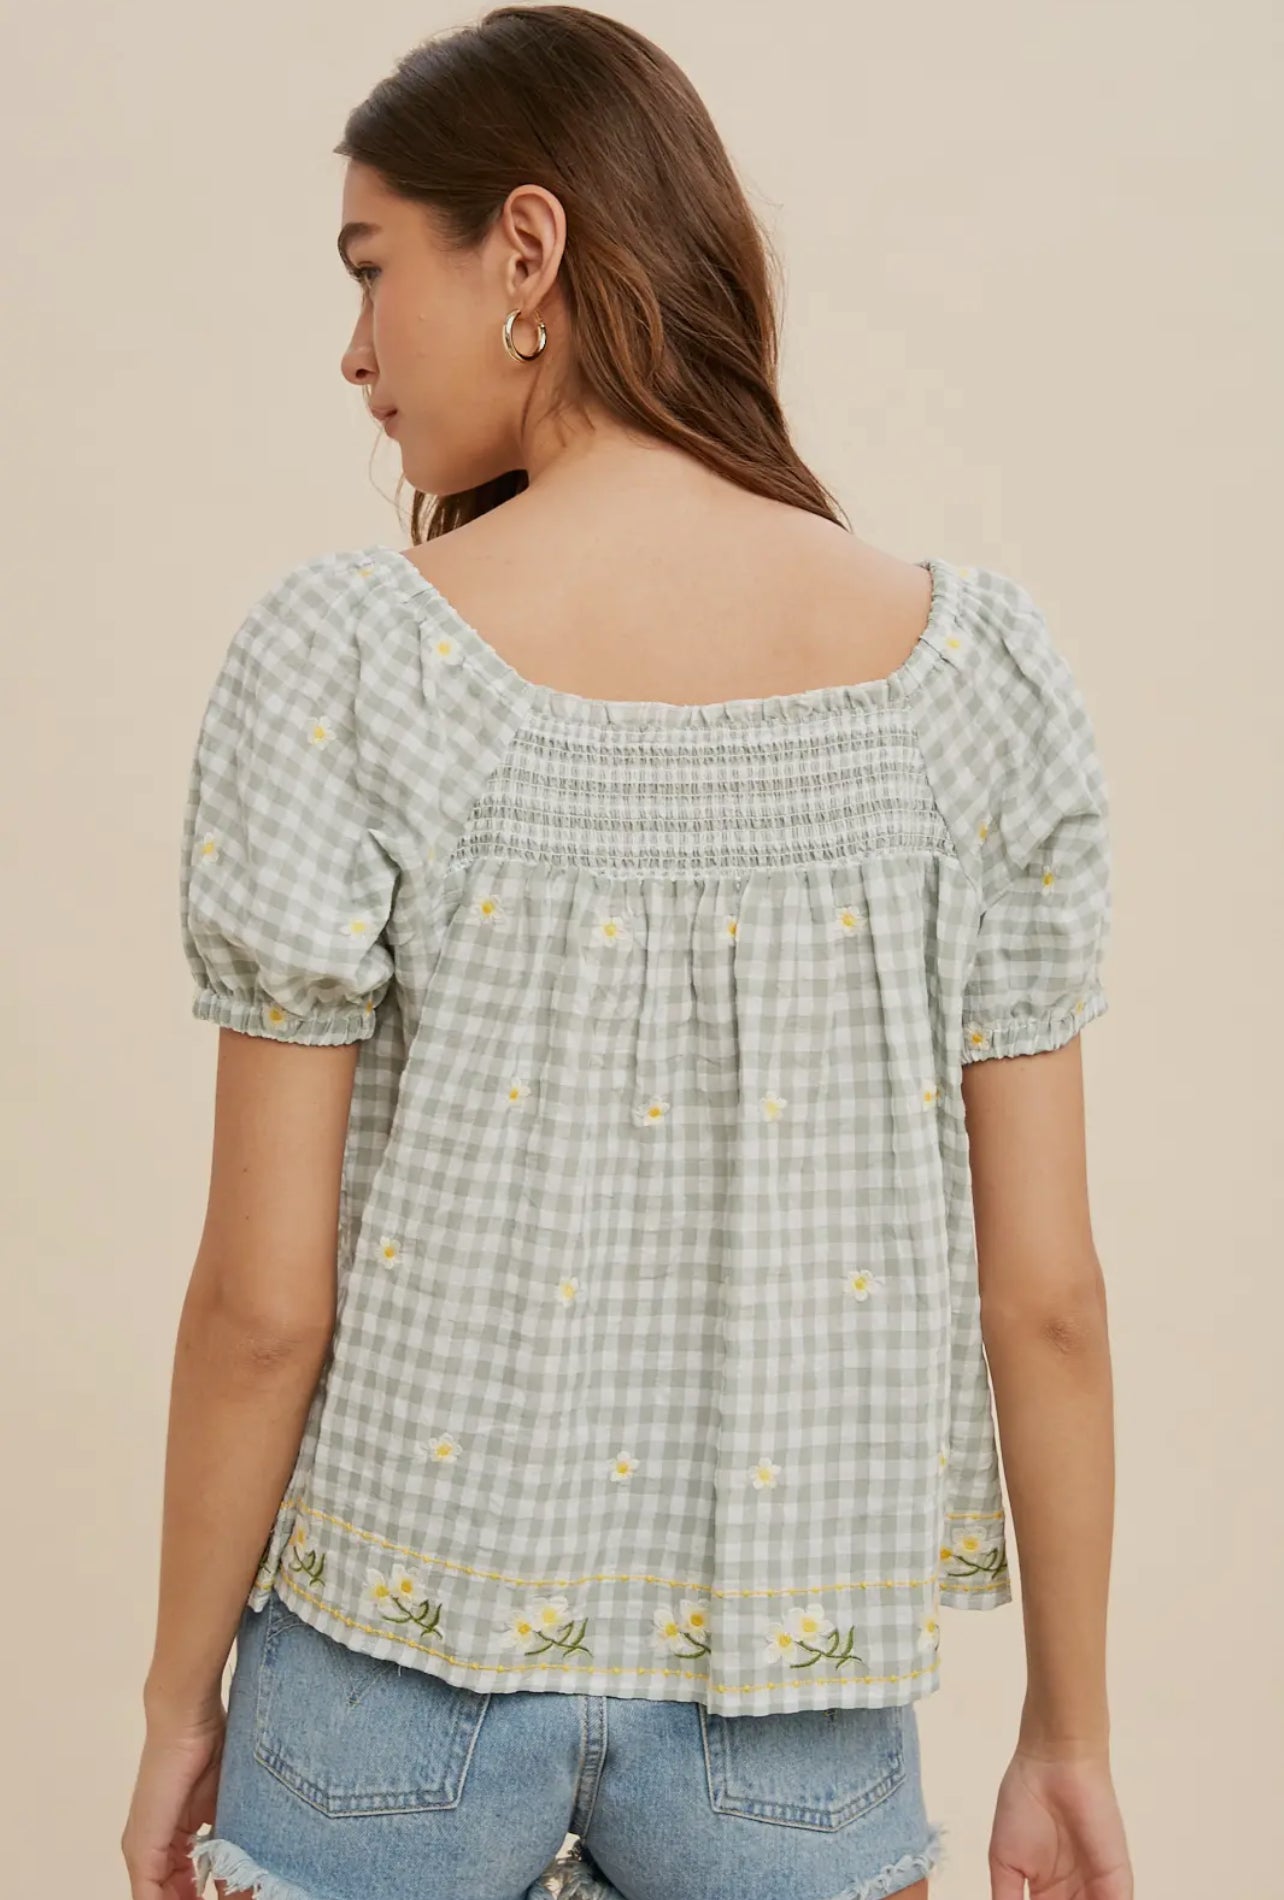 Gingham Embroidered Top